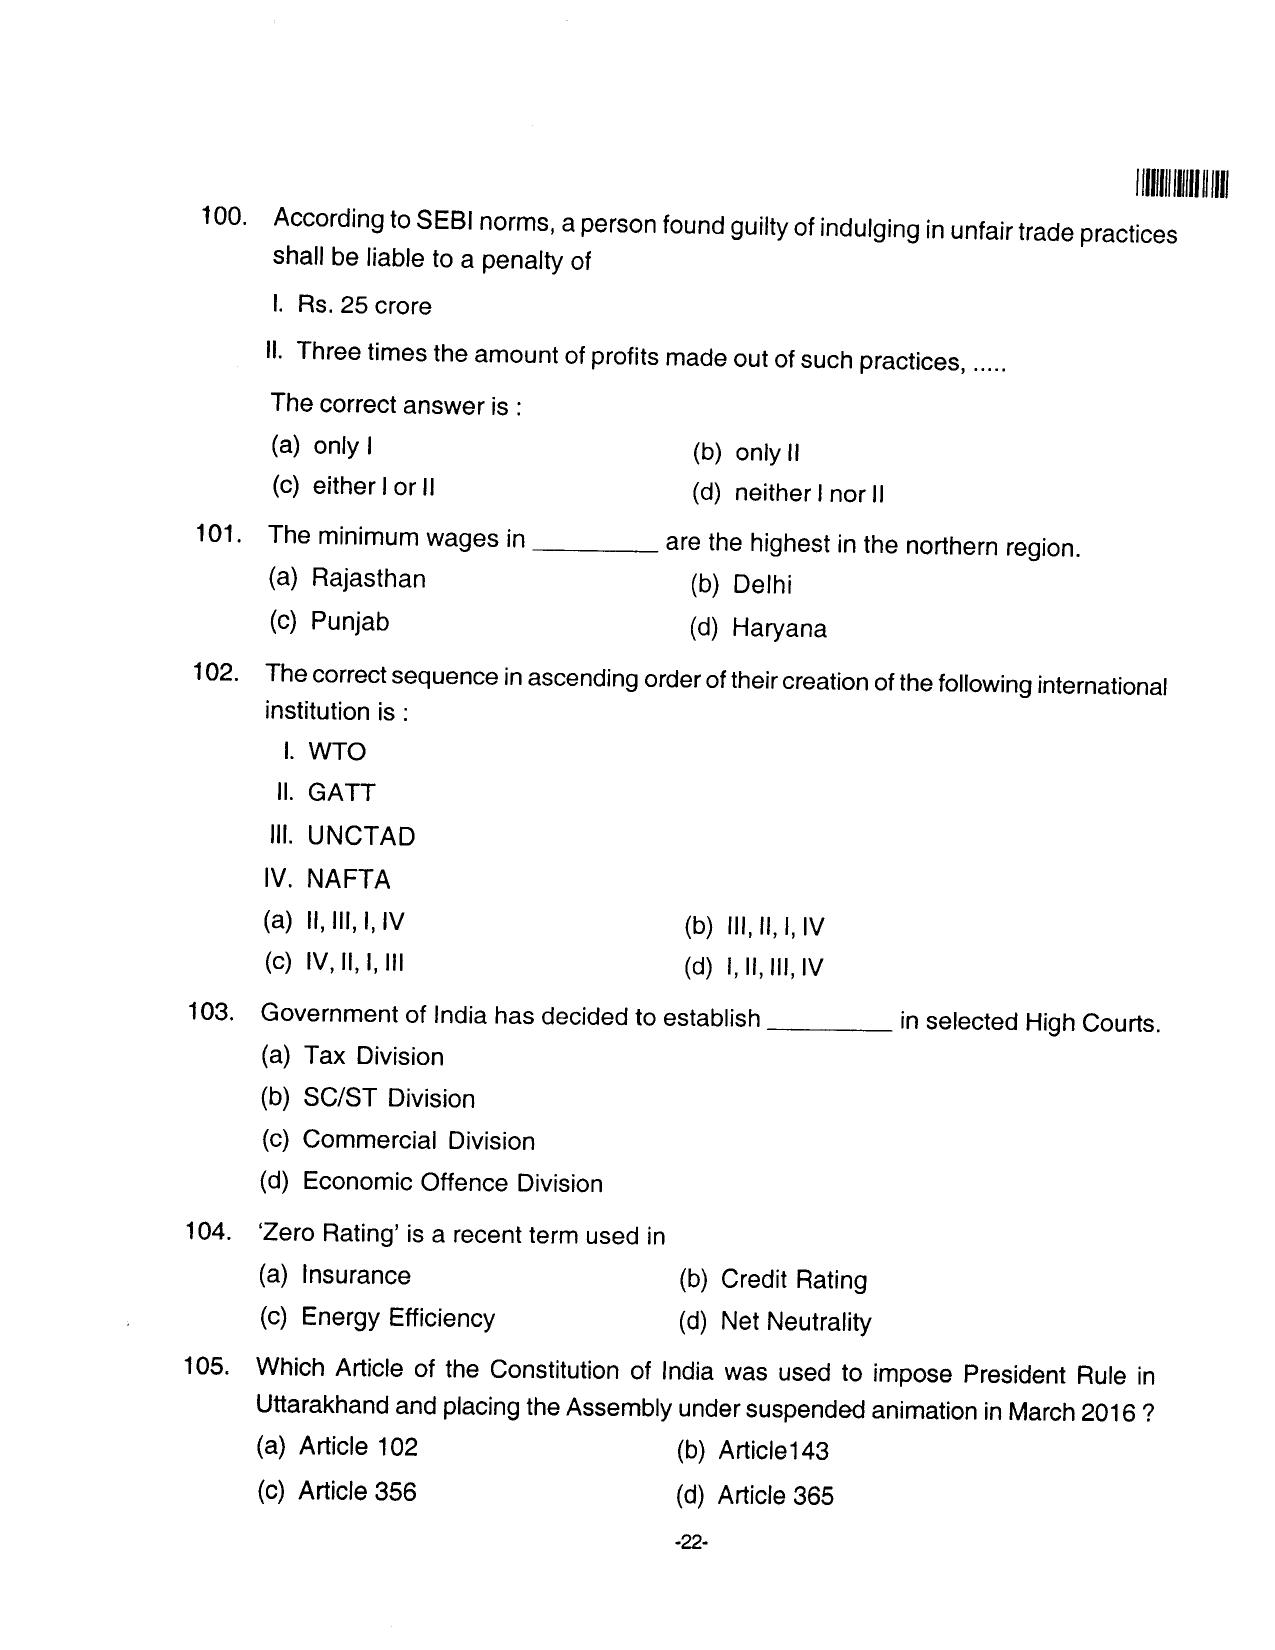 AILET 2016 Question Paper for BA LLB - Page 22